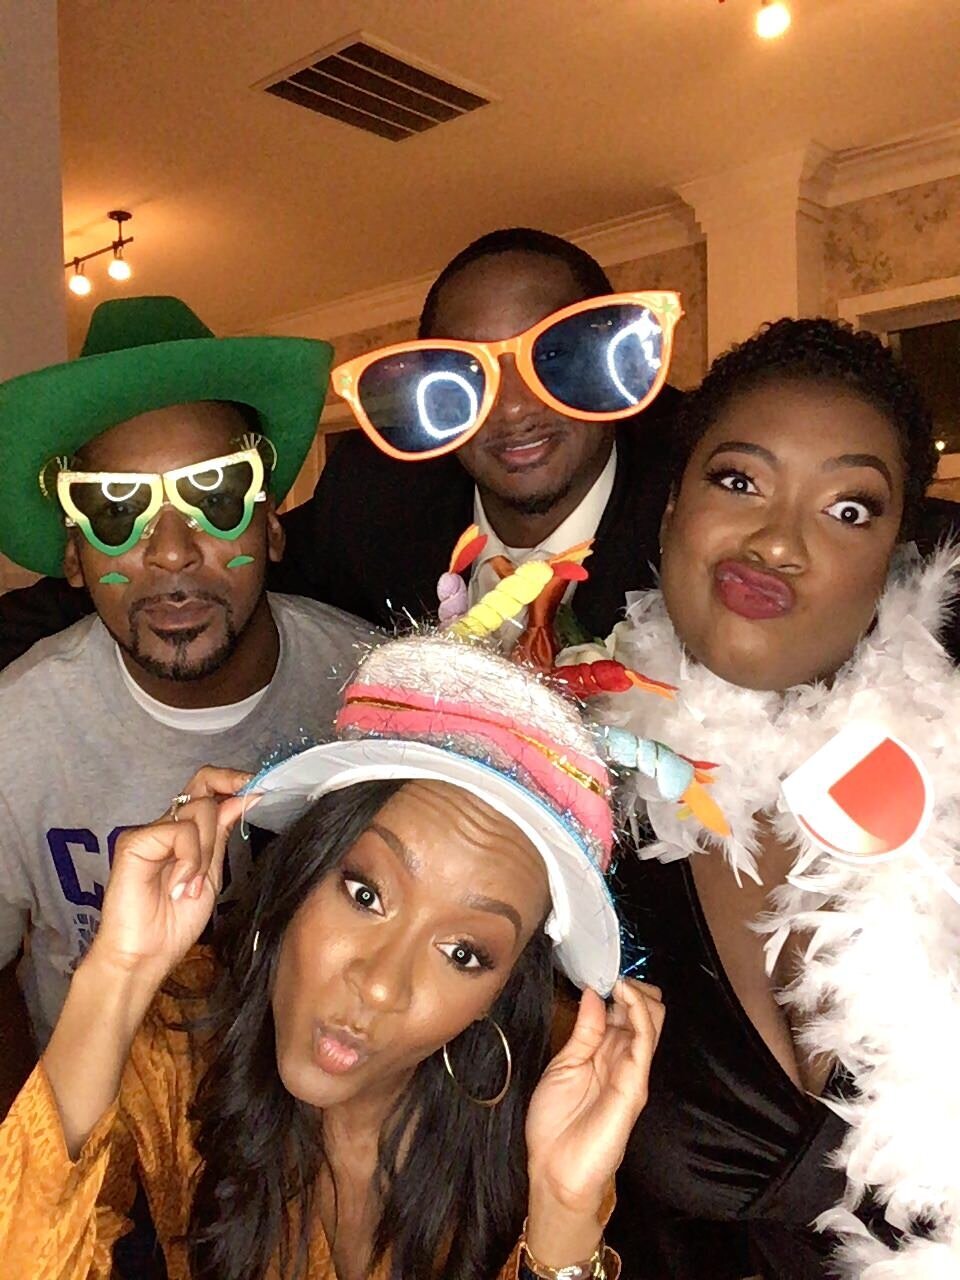 Group of Four together rocking hats and glasses at Wilburn Street Wedding Venue photobooth